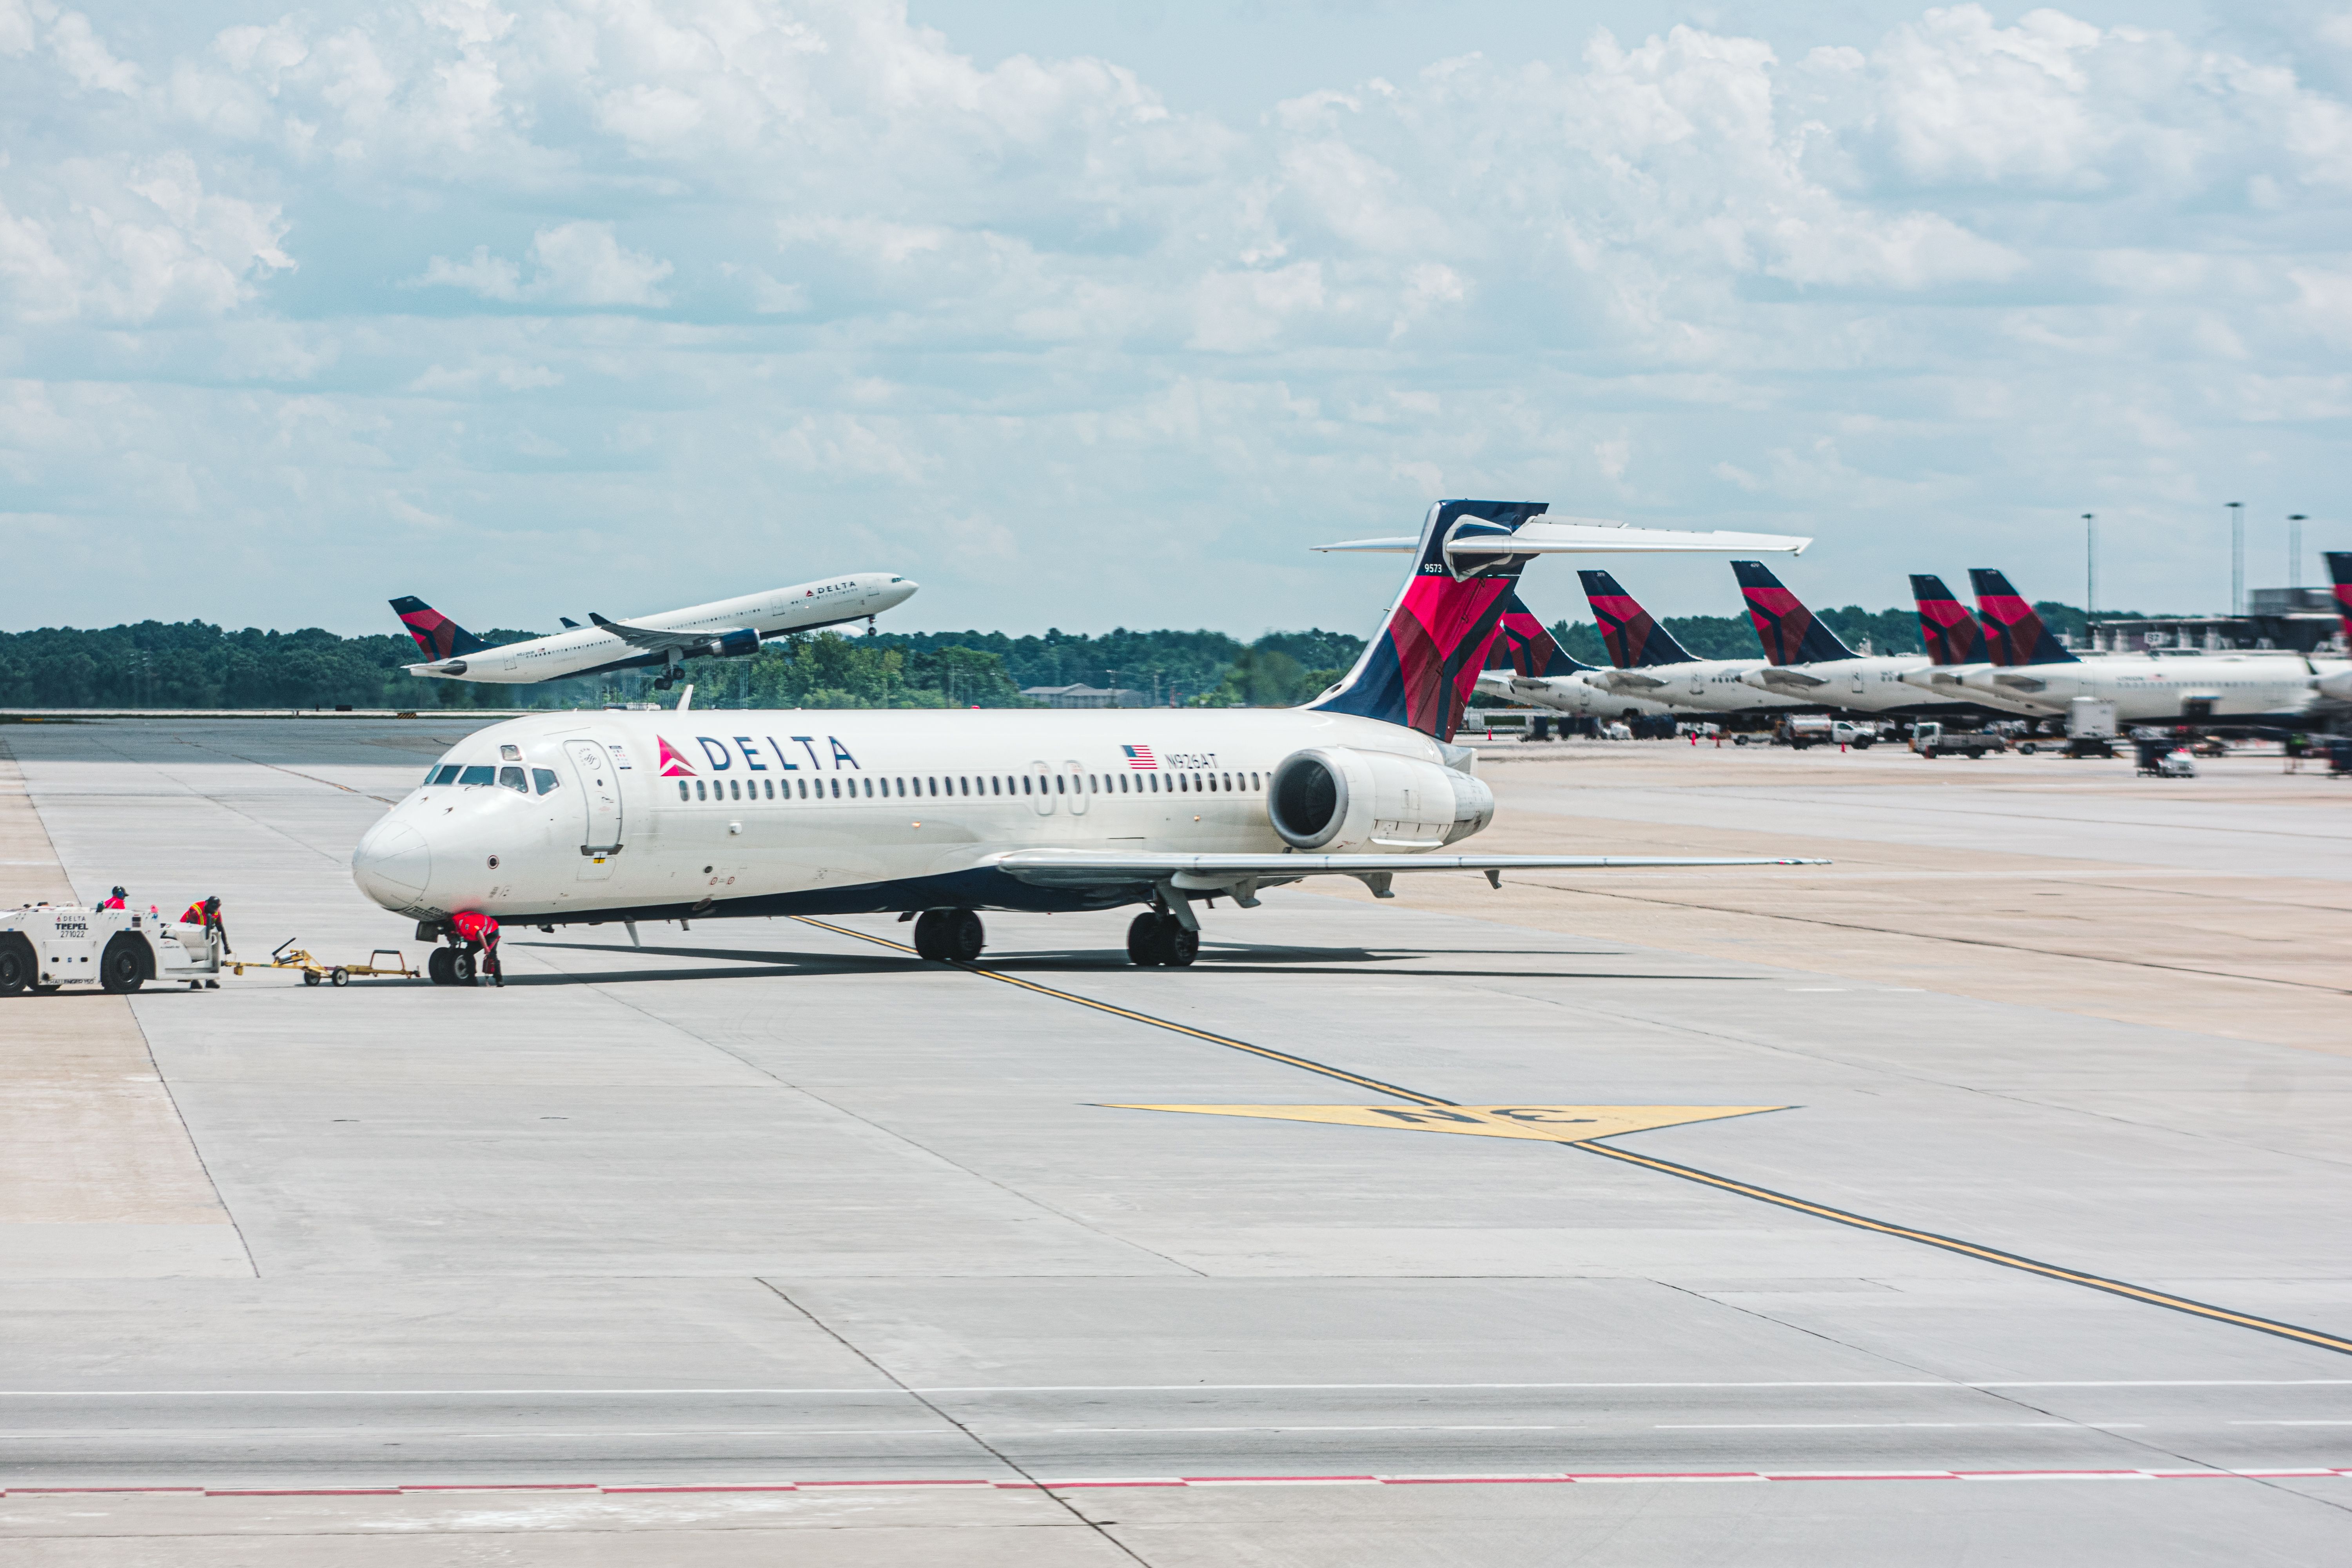 Delta Air Lines Boeing 717 pushing back at ATL - Delta Airbus A330 taking off in background